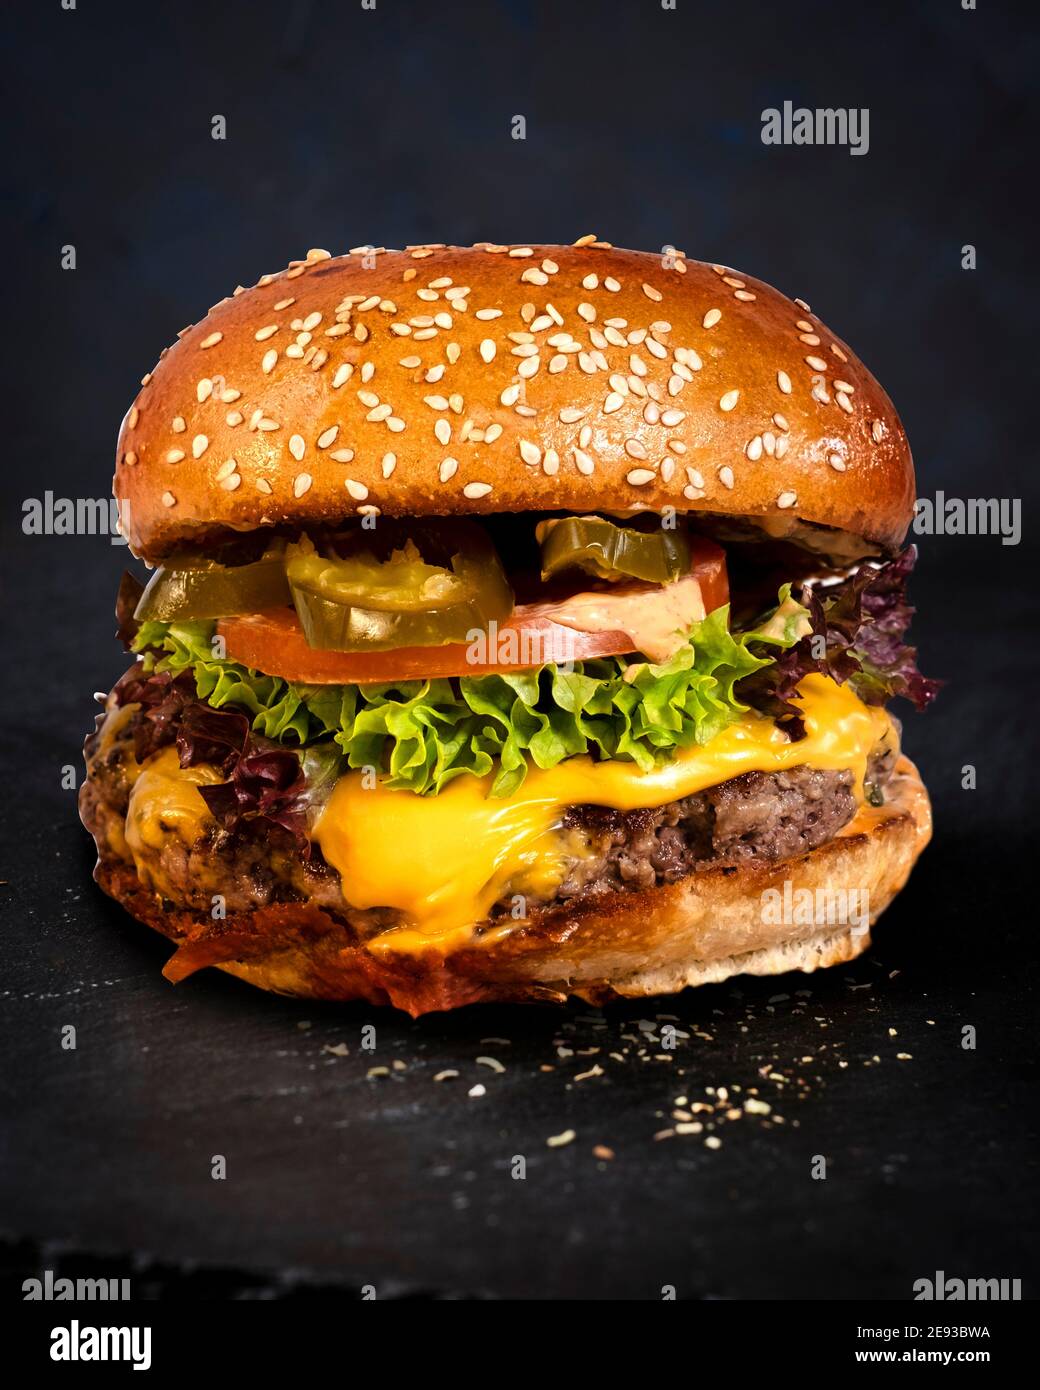 Juicy fiery cheese burger with beef, tomatoes, cucumbers and onions nicely arranged on a skipper plate on a black background Stock Photo